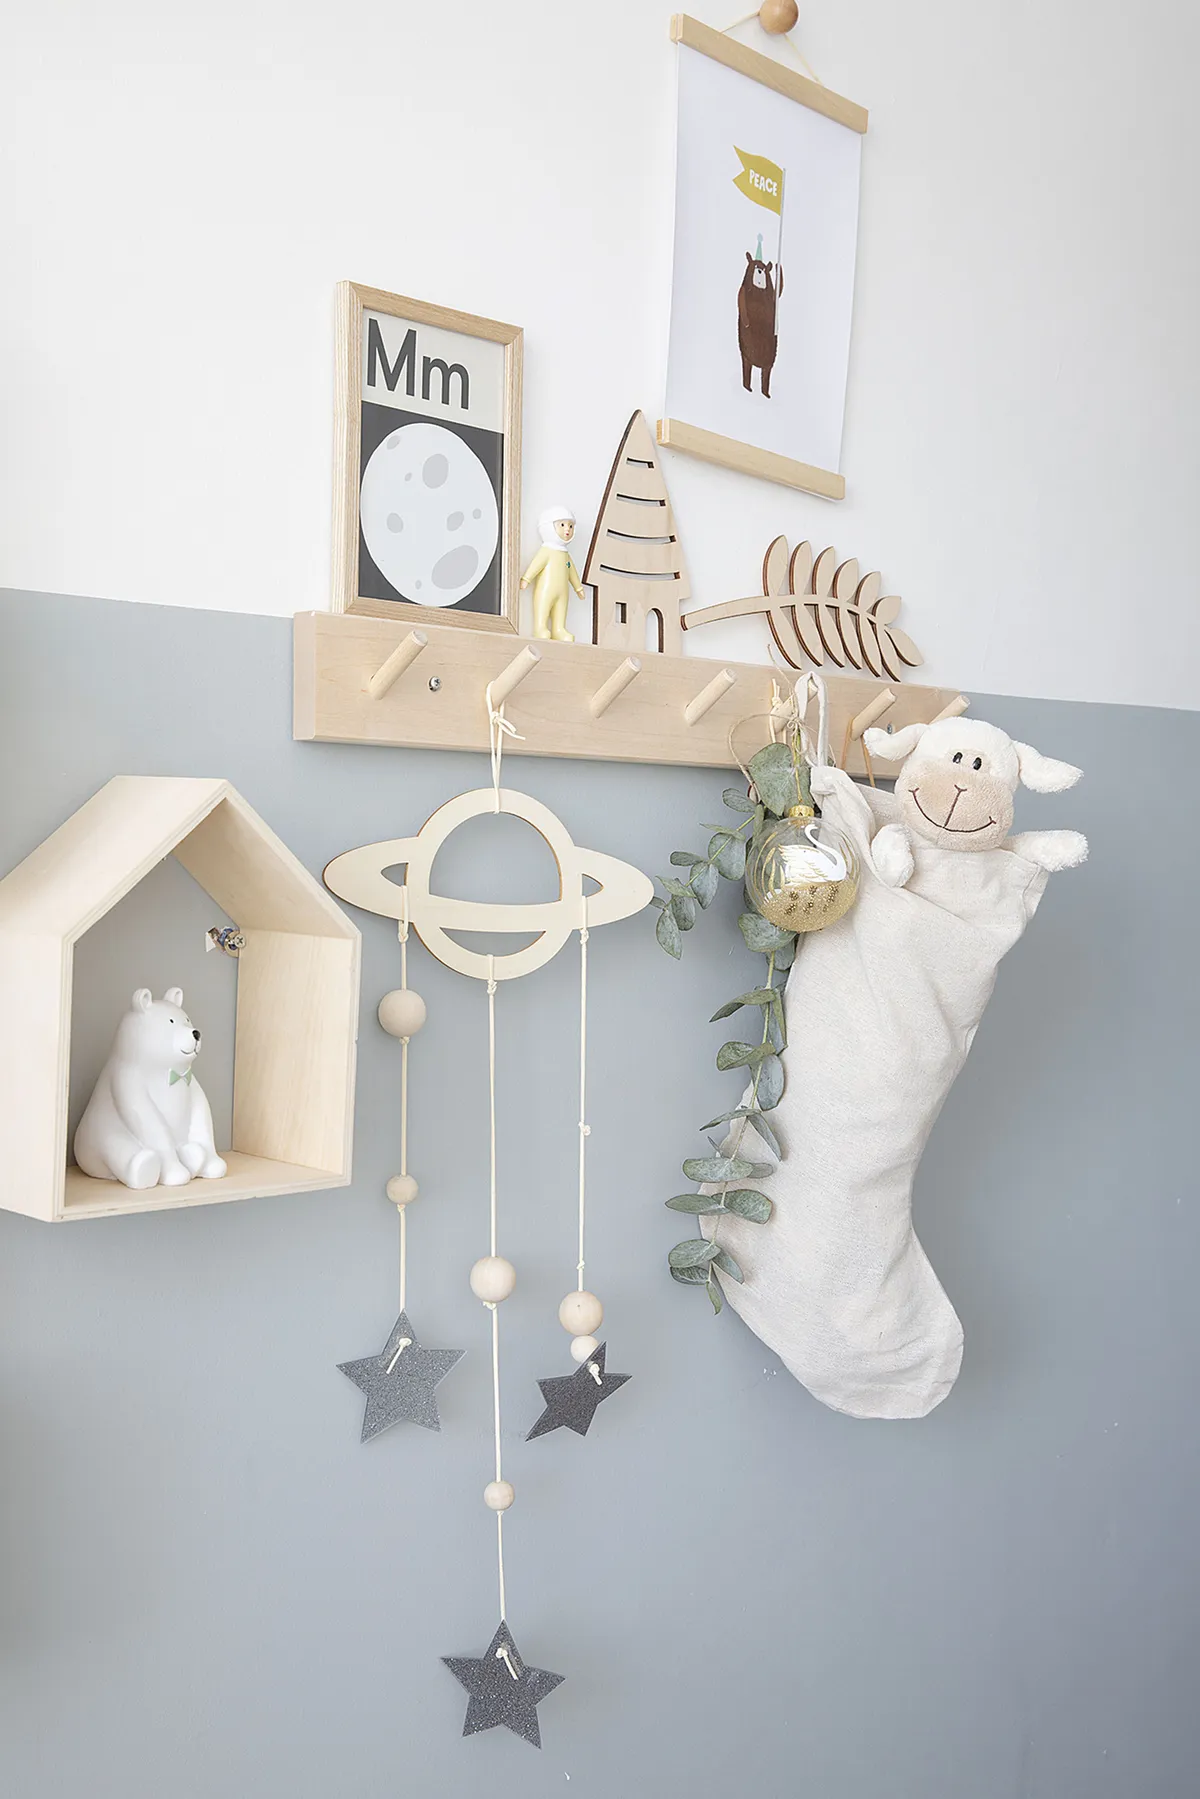 ‘Peg rails are so versatile as you can keep updating and restyling the accessories or use them for clothes,’ Louise explains. The moon picture is by Lorna Freytag, the bear print by Minii and Maxii and Lala Loves Decor sells a similar space mobile